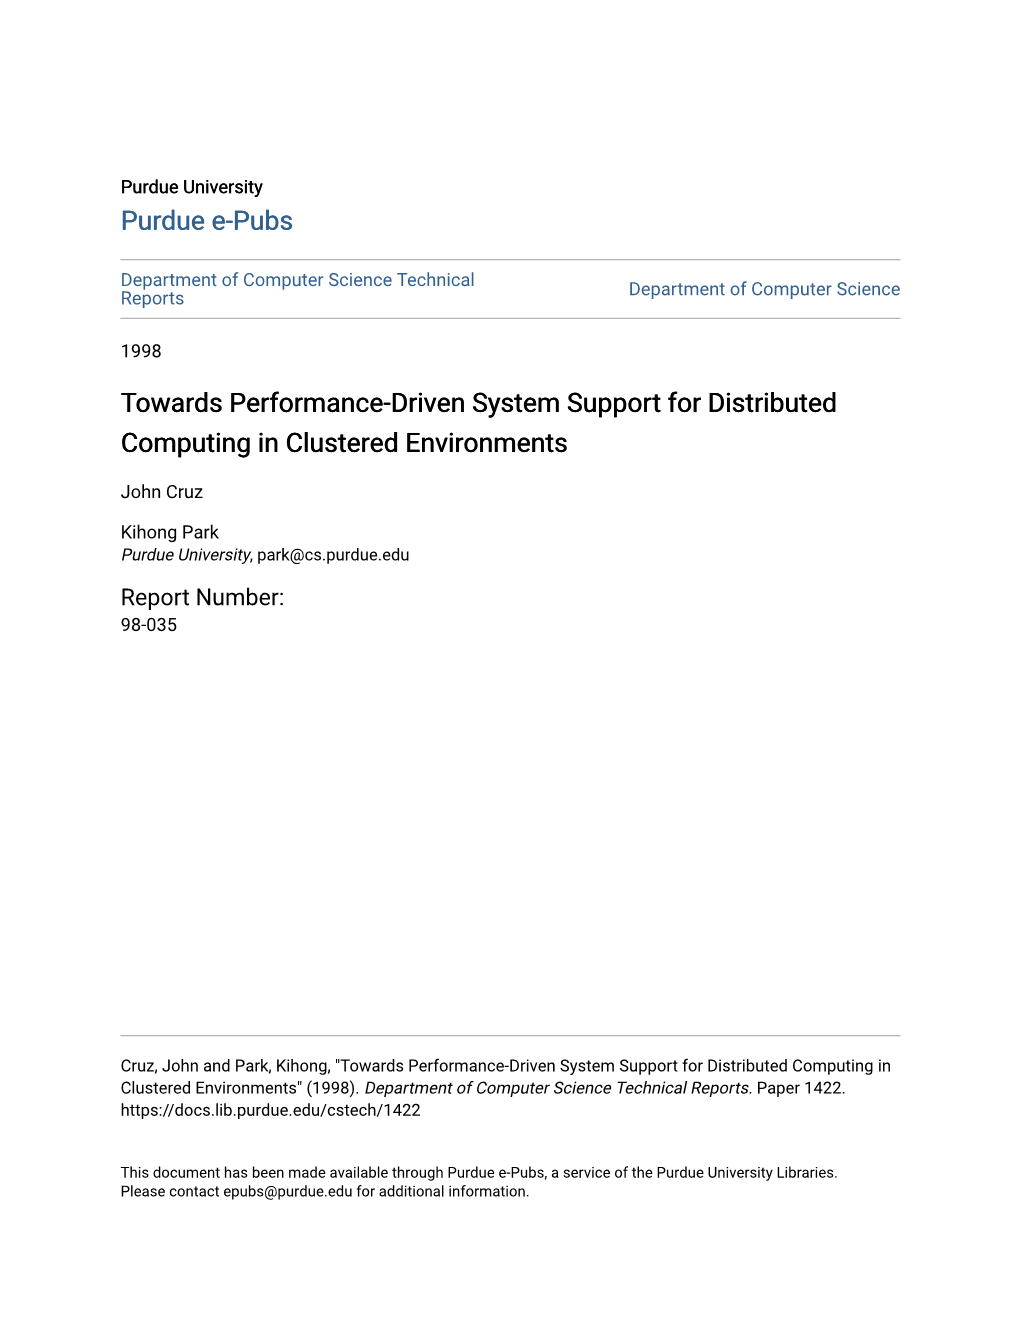 Towards Performance-Driven System Support for Distributed Computing in Clustered Environments